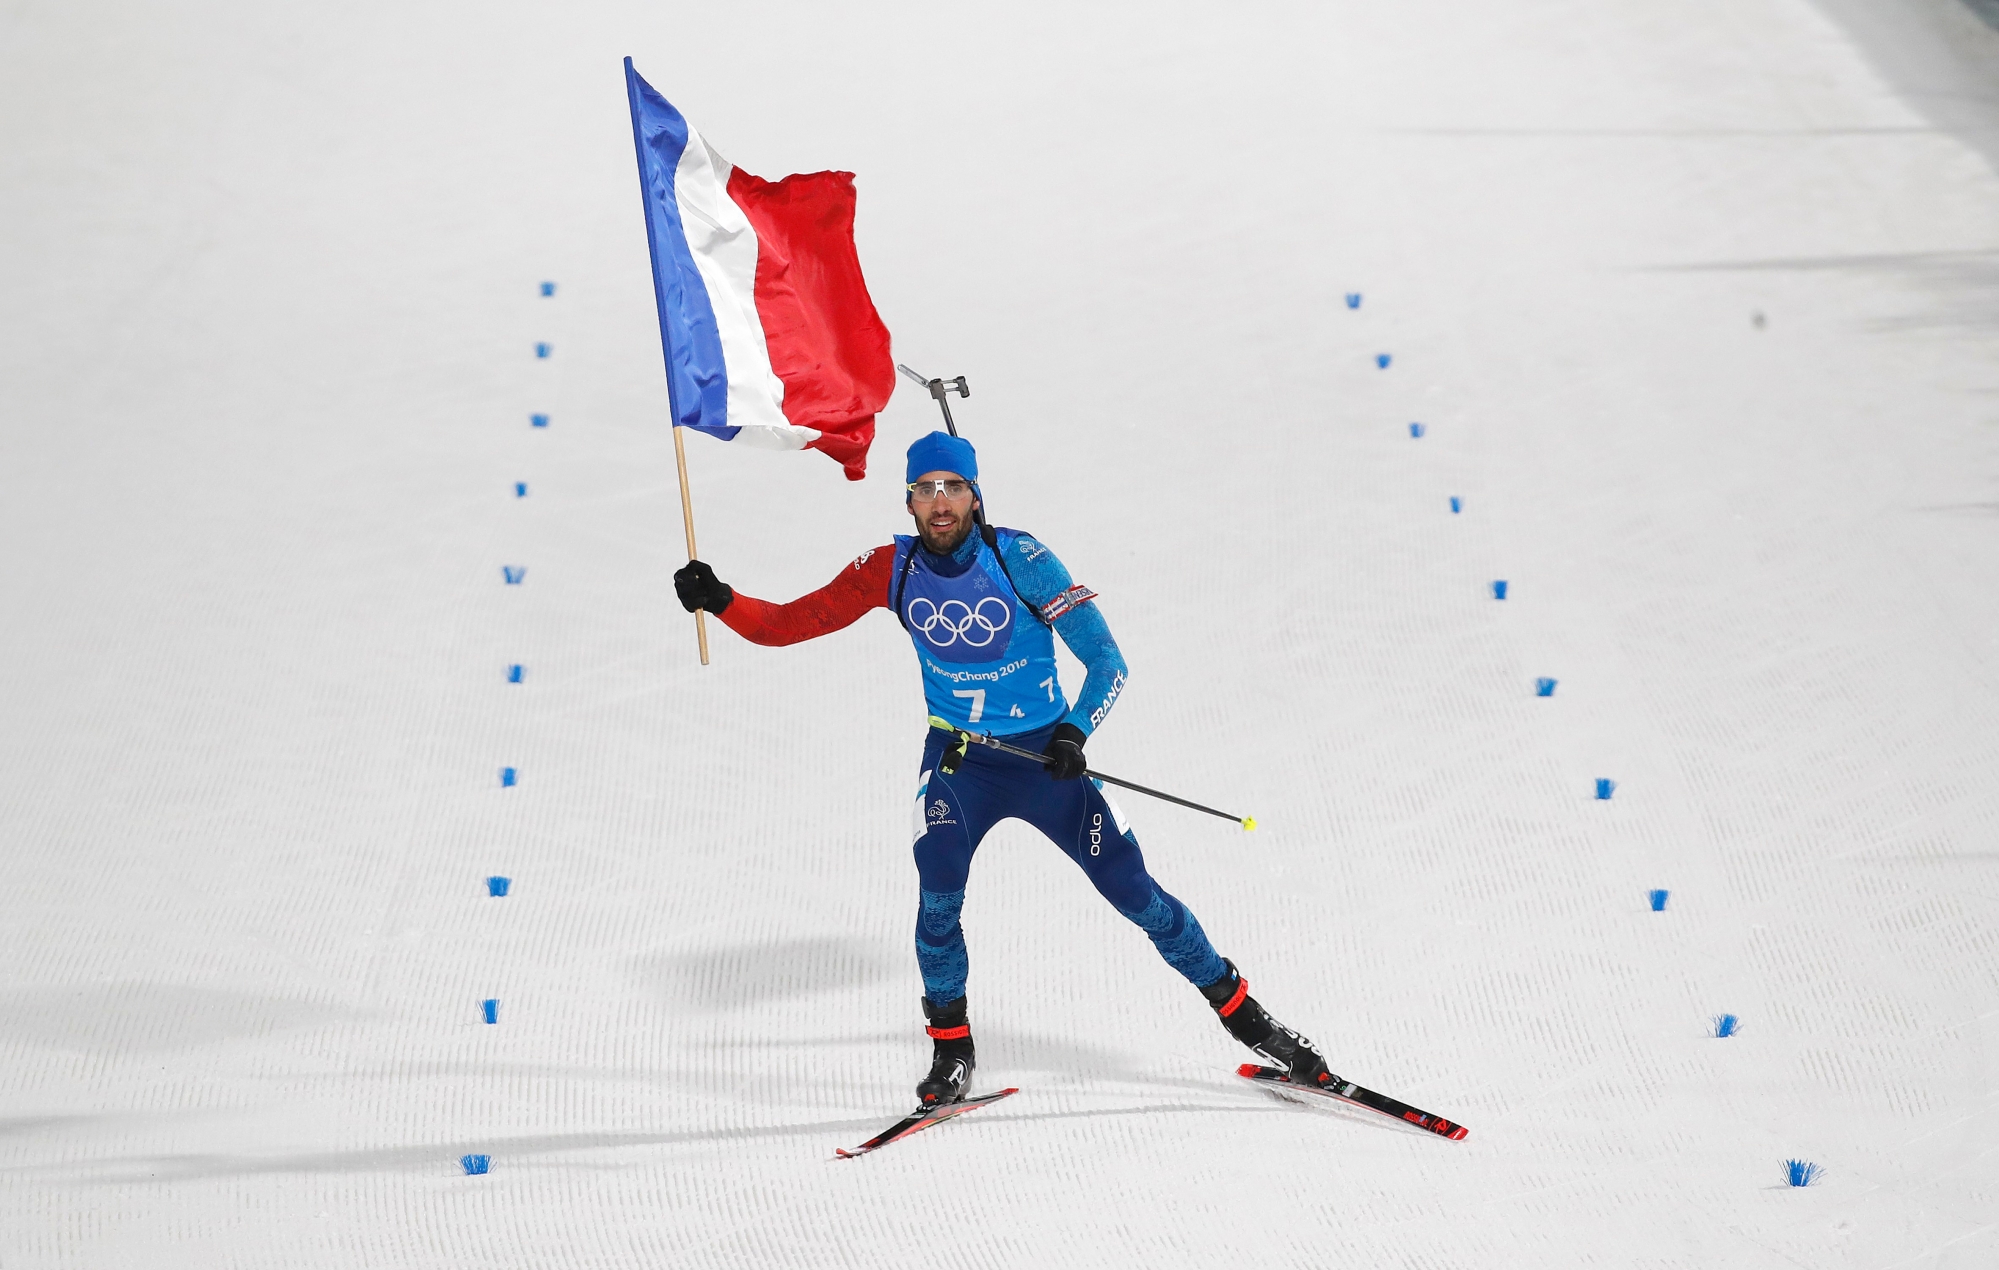 epa06545900 Martin Fourcade of France nears the finish line to win the gold in the Biathlon 2 x 6 km Women + 2 x 7,5 km Men Mixed Relay race at the Alpensia Biathlon Centre during the PyeongChang 2018 Olympic Games, South Korea, 20 February 2018.  EPA/DIEGO AZUBEL SOUTH KOREA PYEONGCHANG 2018 OLYMPIC GAMES